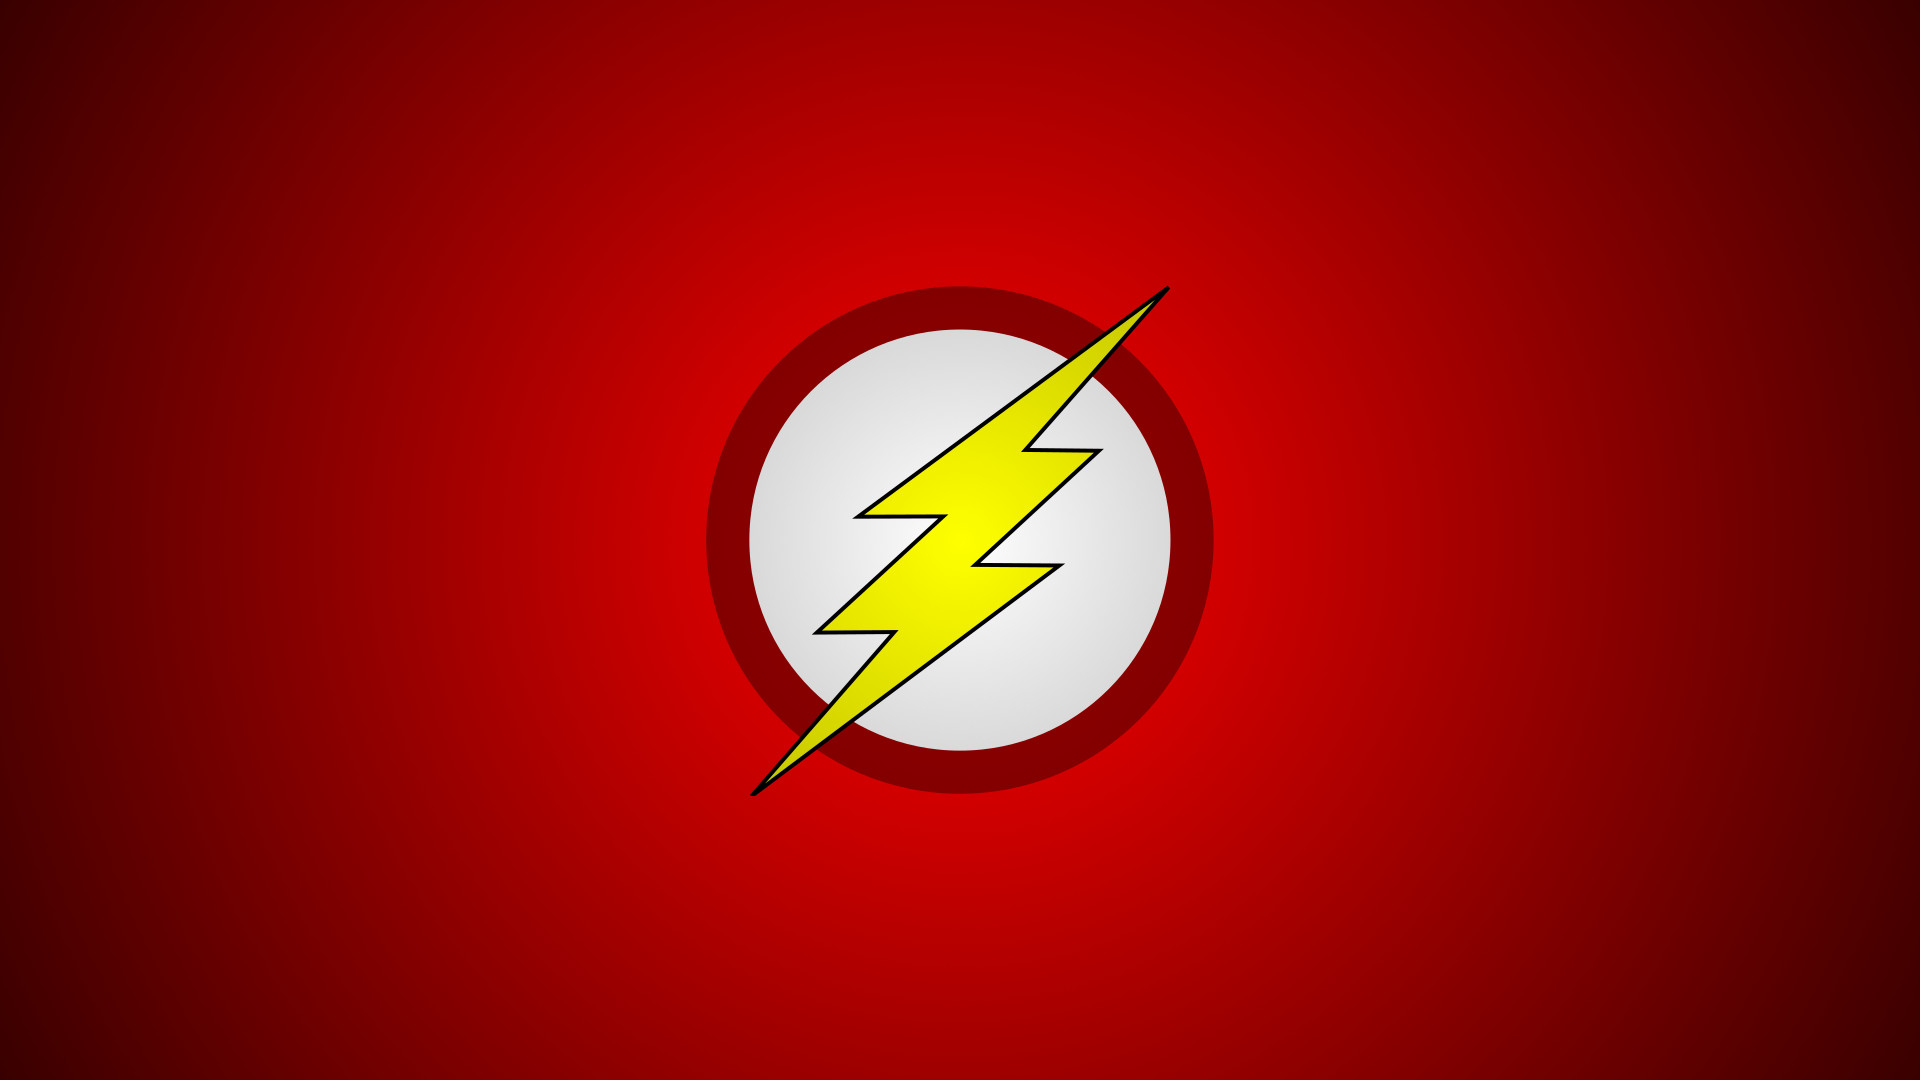 1920x1080 The Flash and The Reverse Flash Wallpapers - Album on Imgur